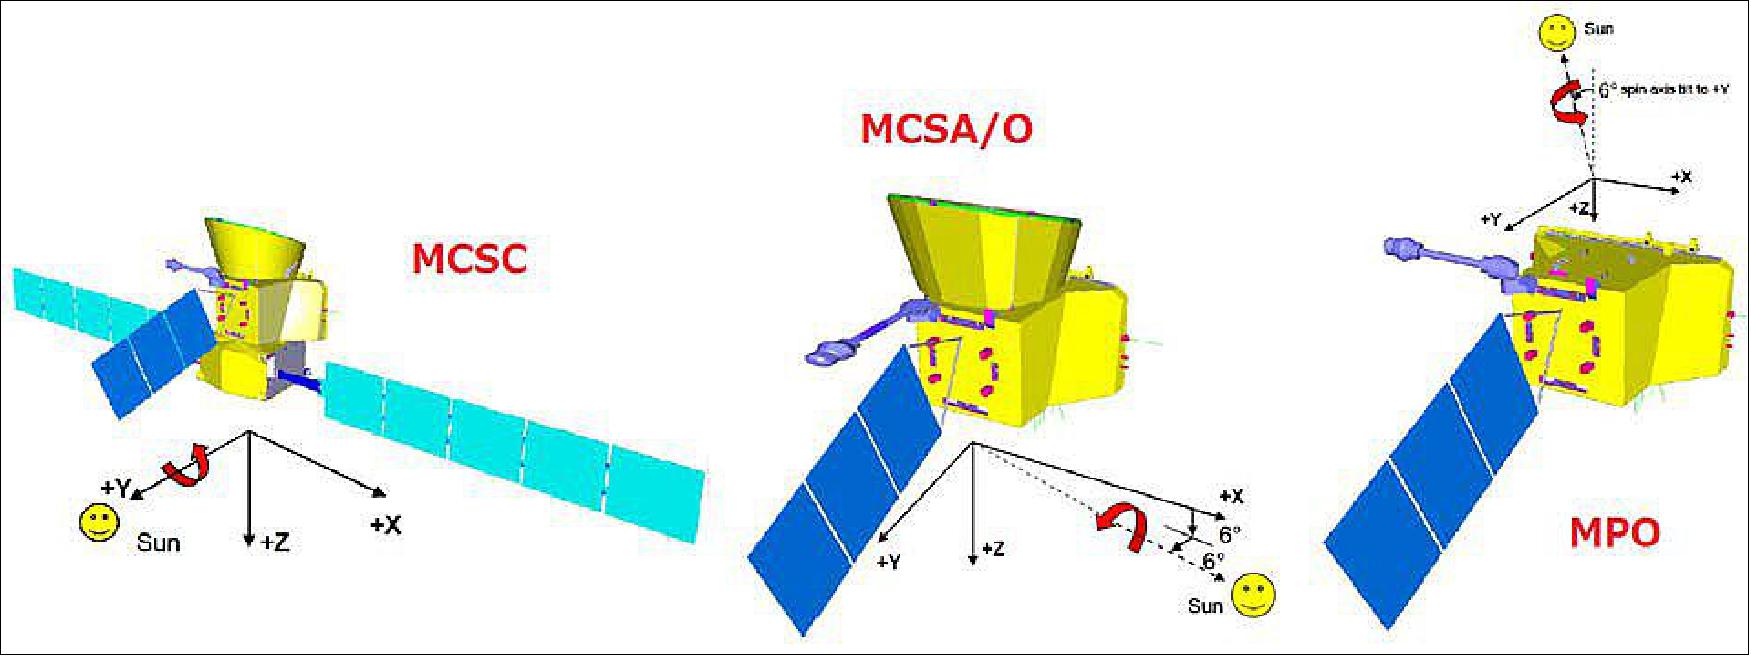 Figure 9: Different safe mode attitudes depending on S/C configuration: +Y sun pointing for MCSC, sun close to +X for MCSA/O, sun close to –Z for MPO. Safe mode concept is to have a rotation around the sun line, which has to be in synch with the orbital motion around Mercury in MPO and MCSO configurations (image credit: ESA)